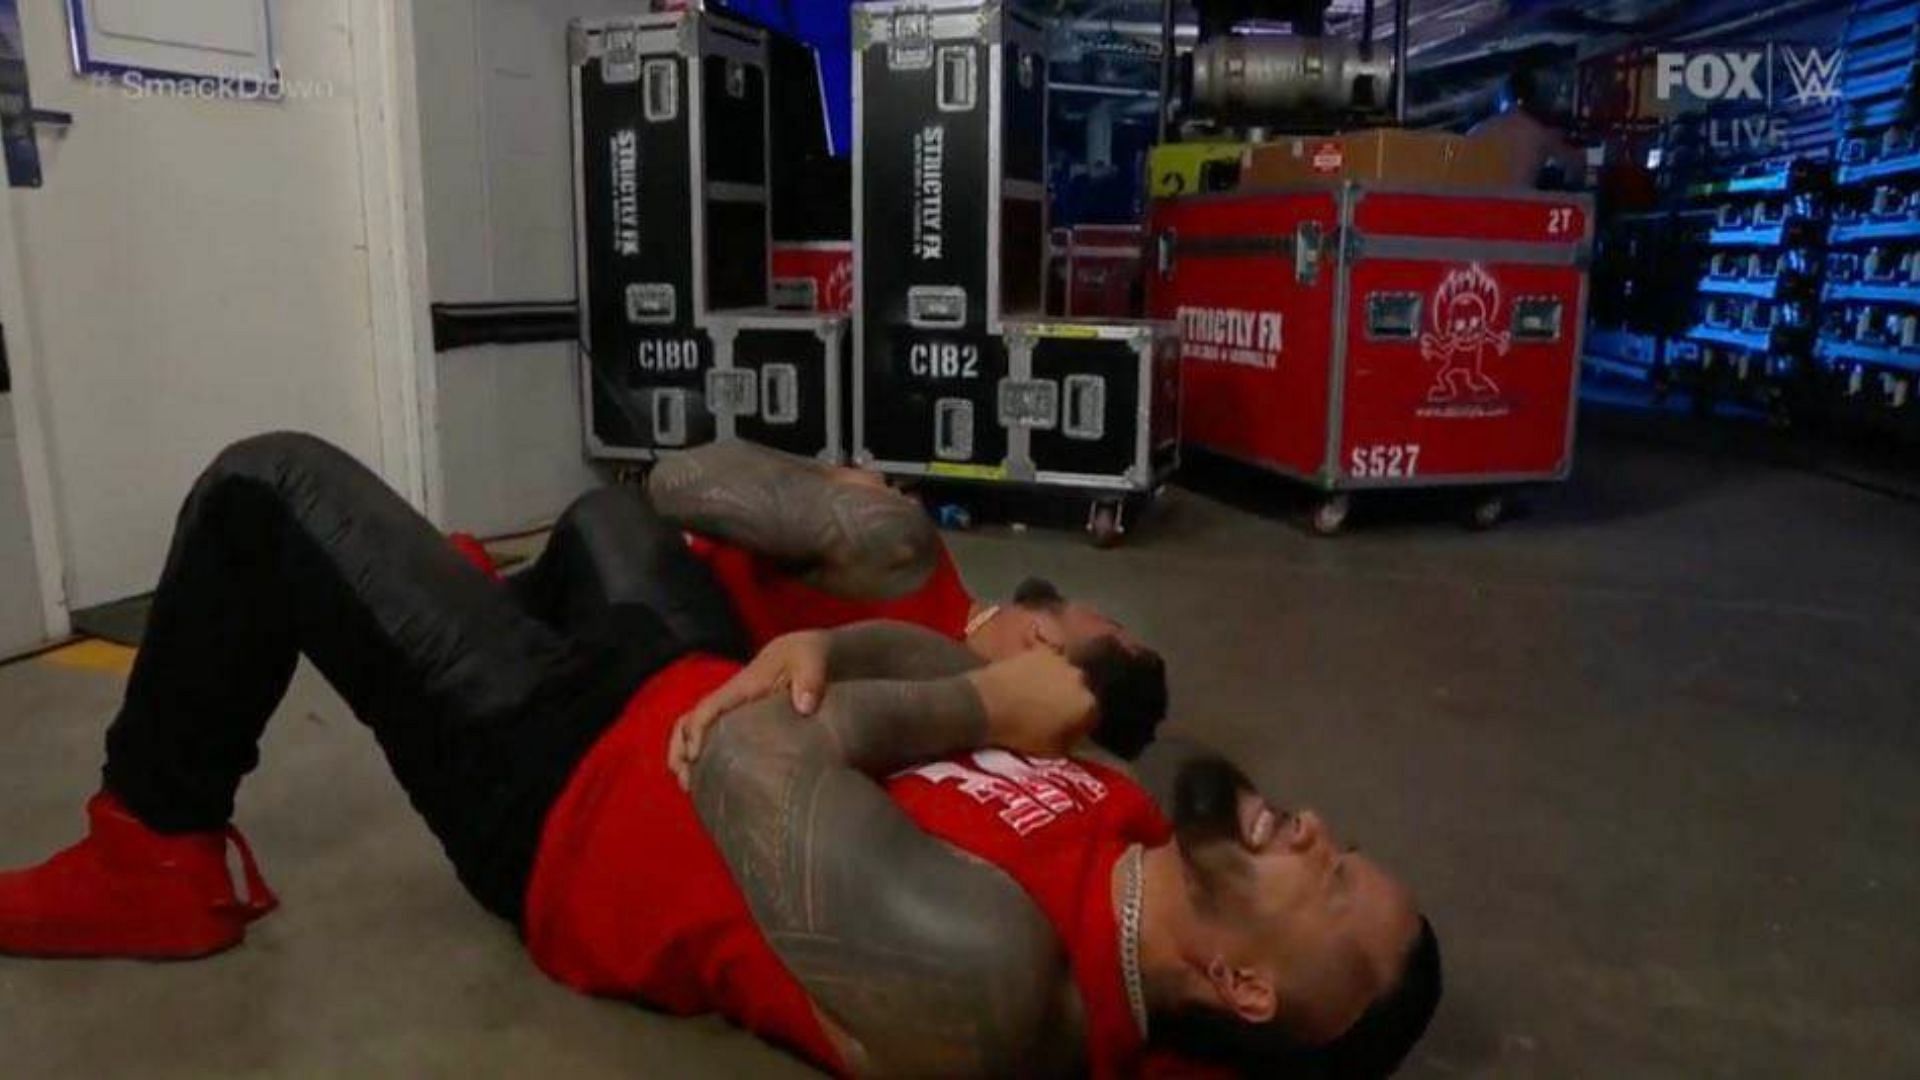 The Usos have held the Undisputed WWE Tag Team Titles for months